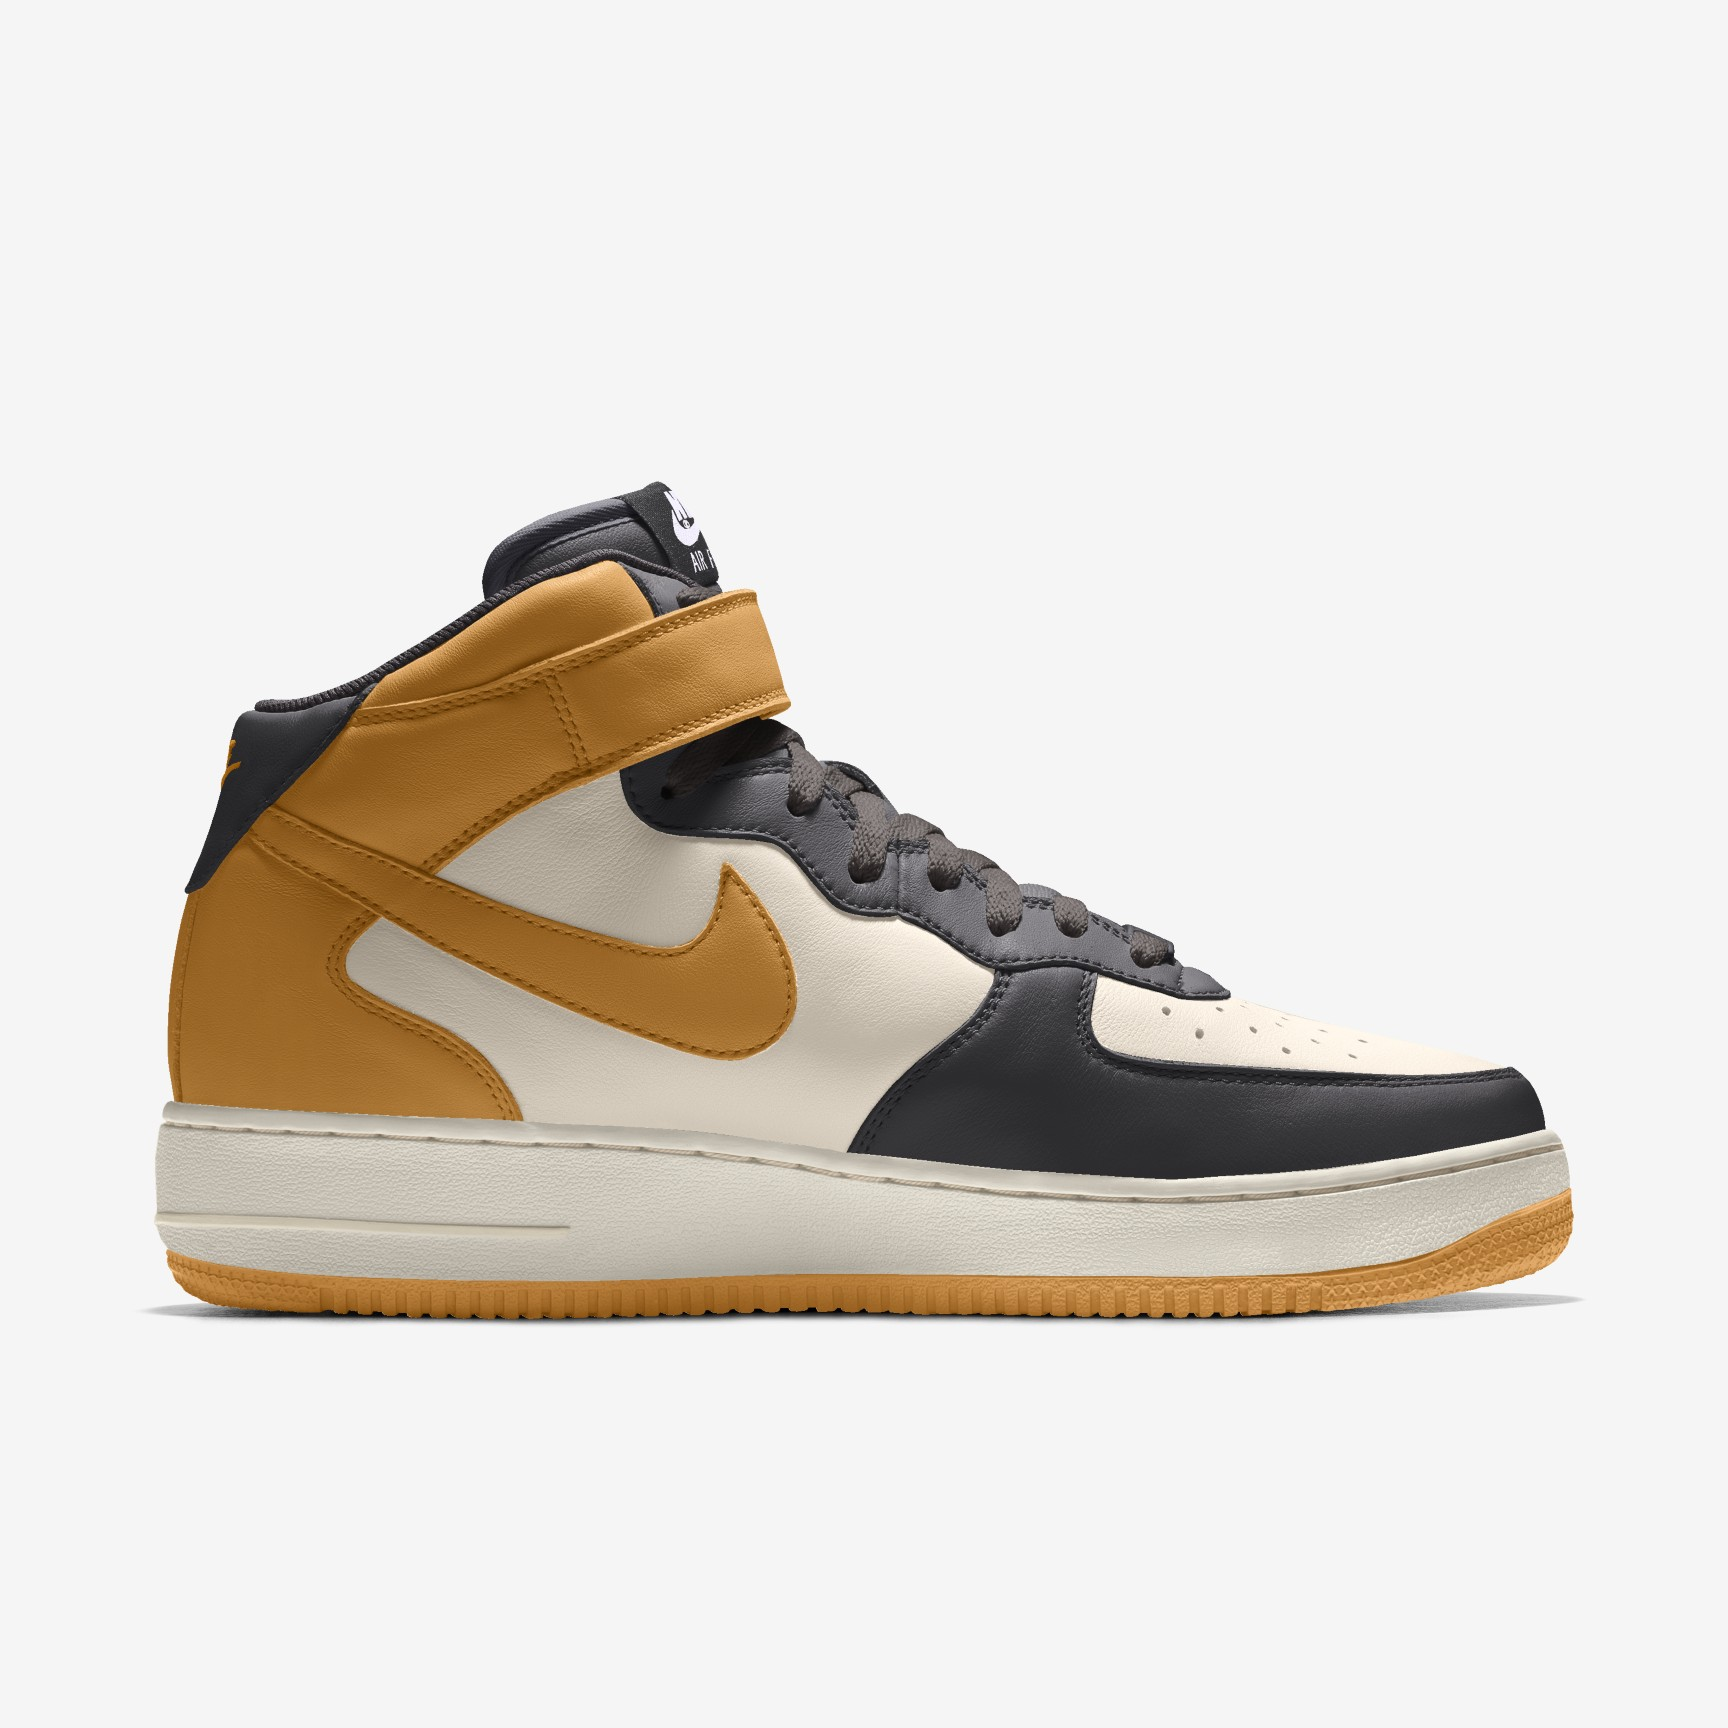 NIKE AIR FORCE 1 MID BY YOU X HKR DESIGNED V12.17 ⋆ Hypekickrelease